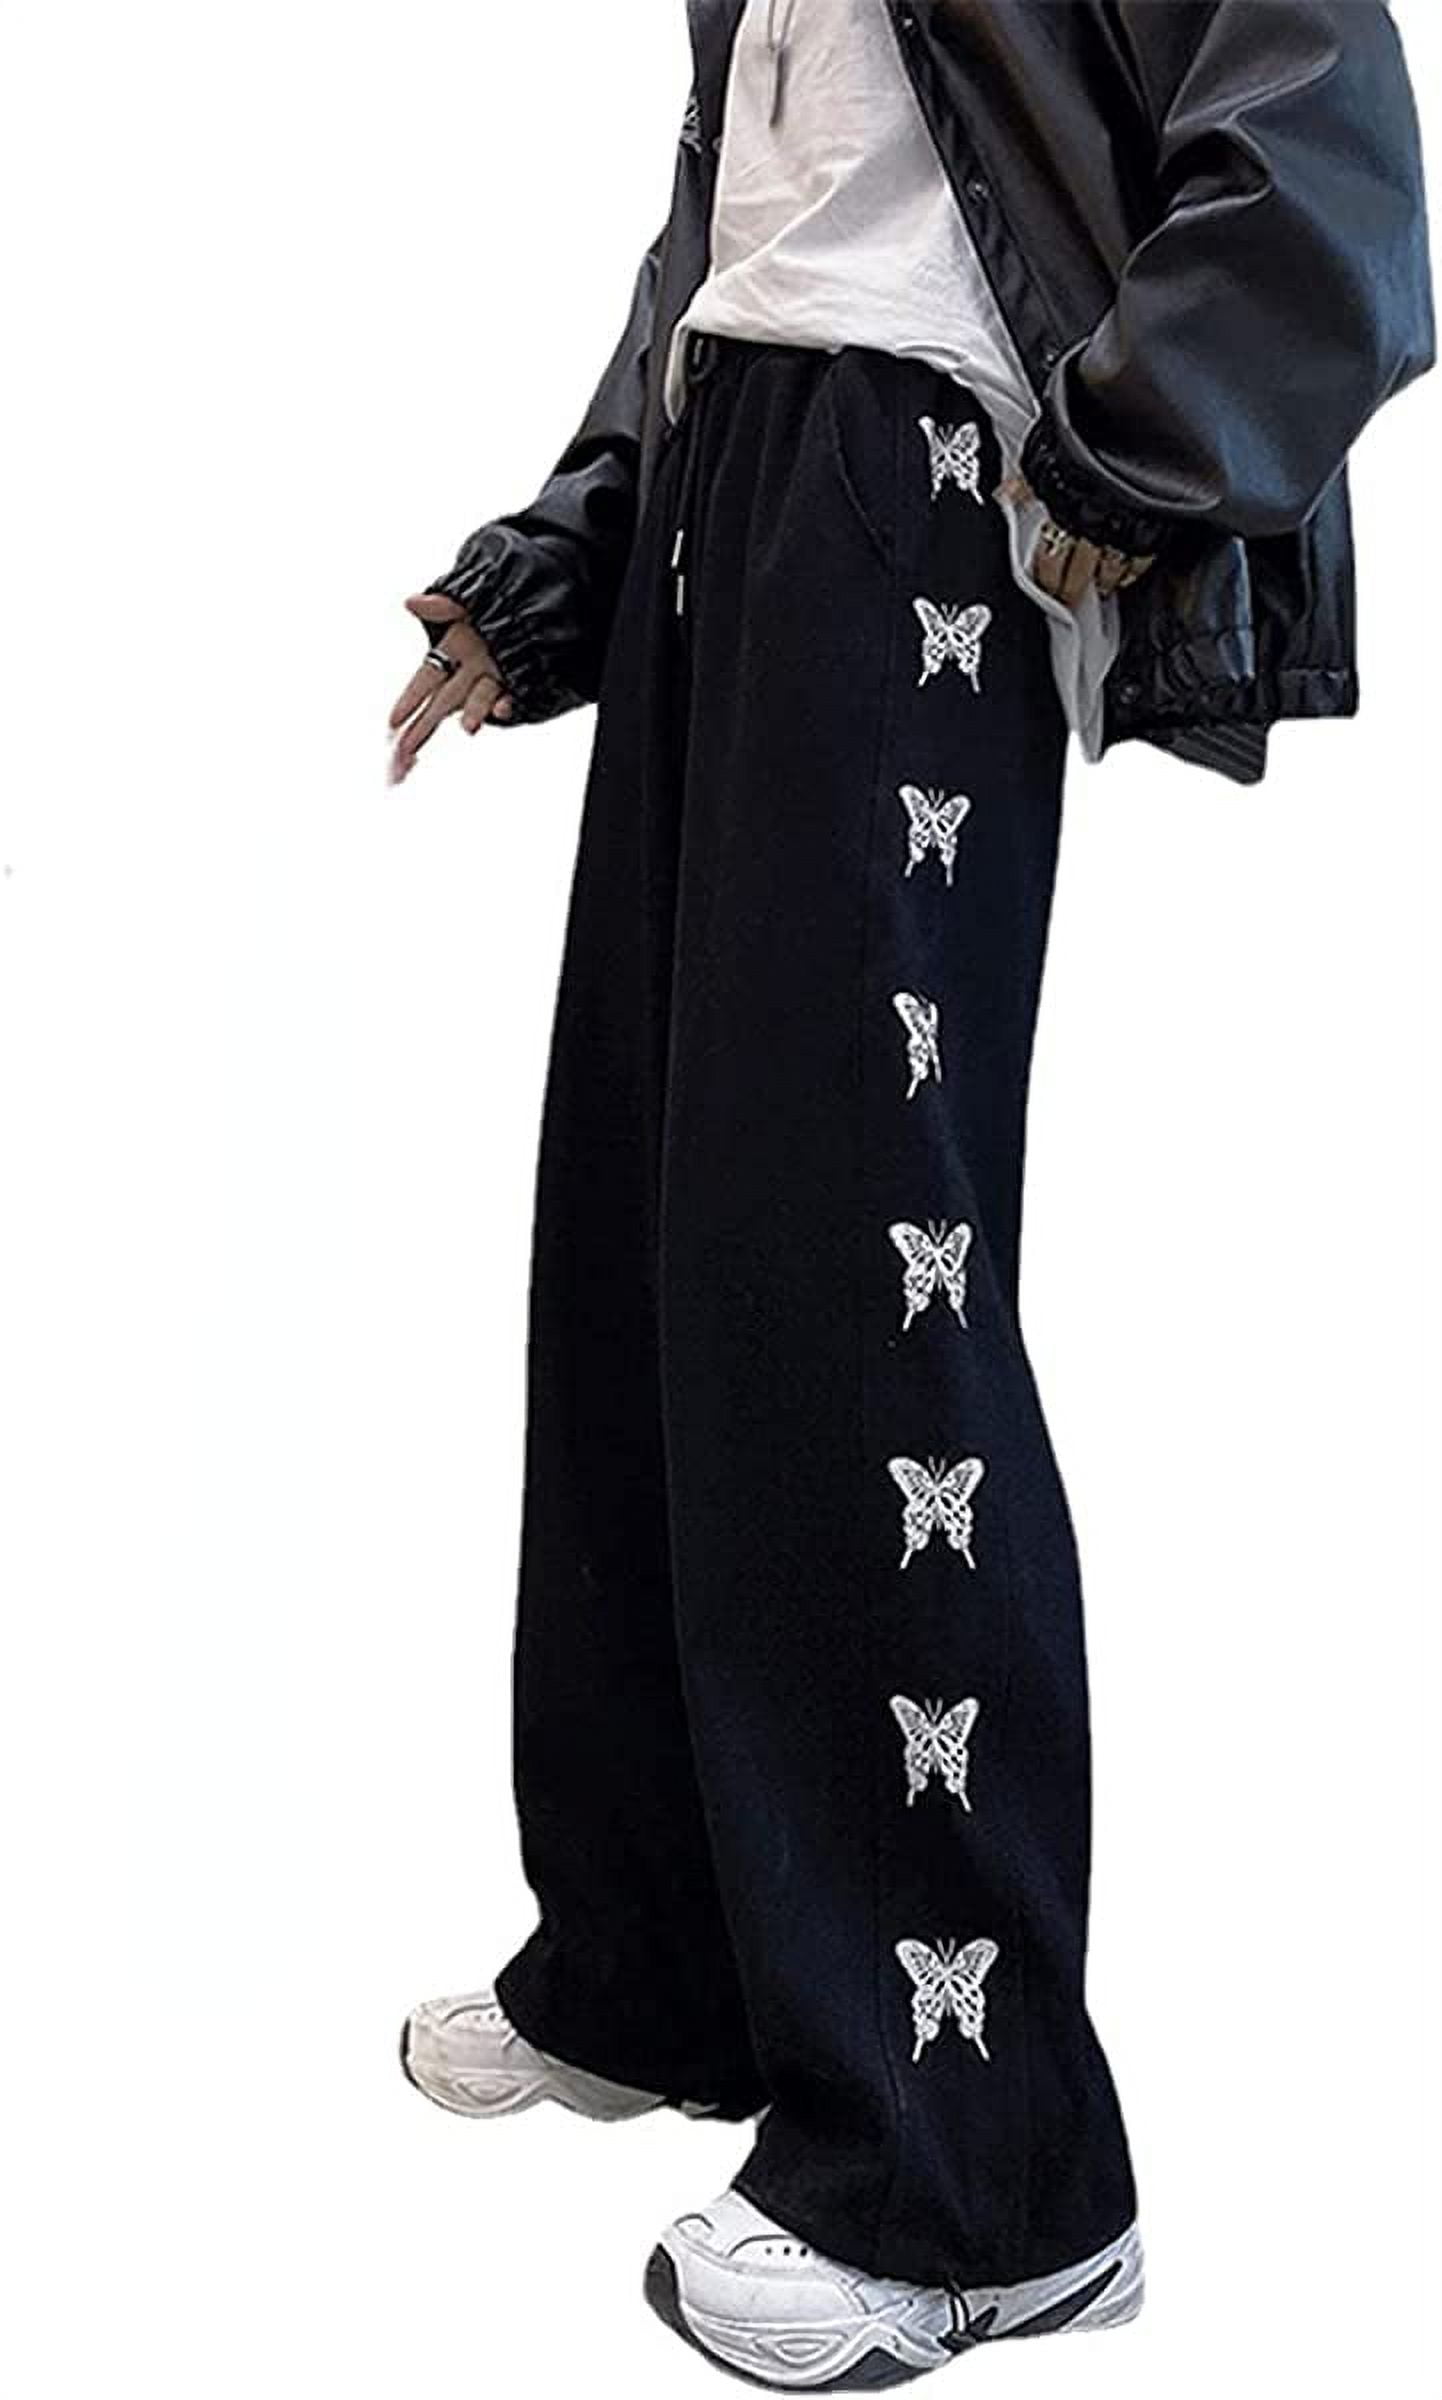 High Quality Embroidered Butterfly Needles Track Pants For Men And Women  Straight AWGE Tech Trousers With All Black Design 1 1/1 Scale Item #230825  From Powerstore02, $29.7 | DHgate.Com